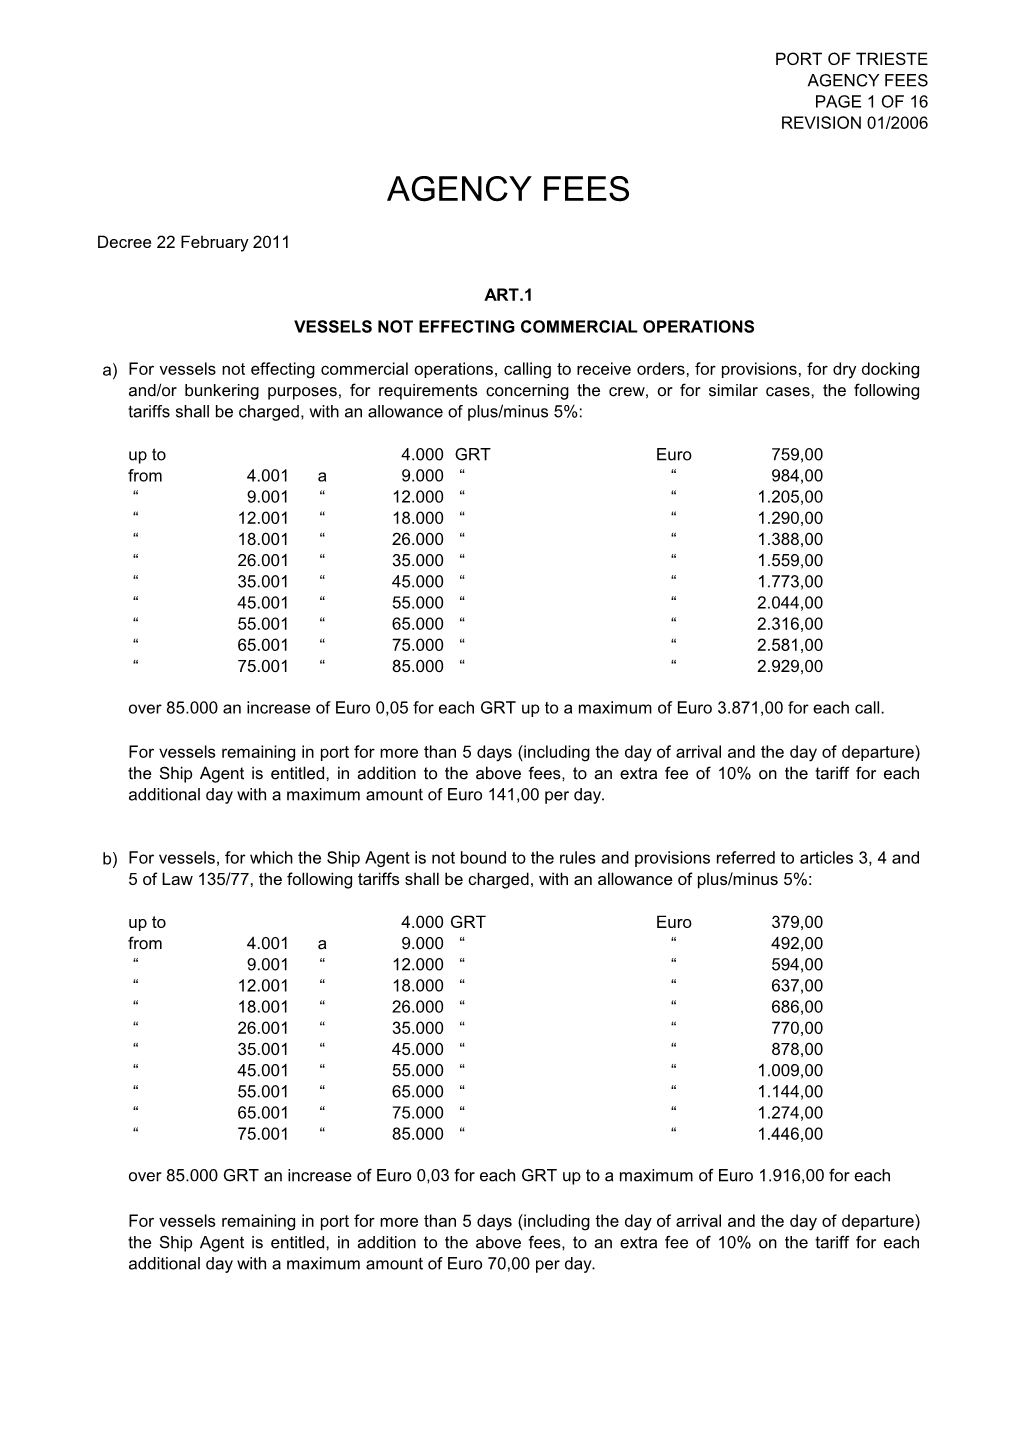 Agency Fees Page 1 of 16 Revision 01/2006